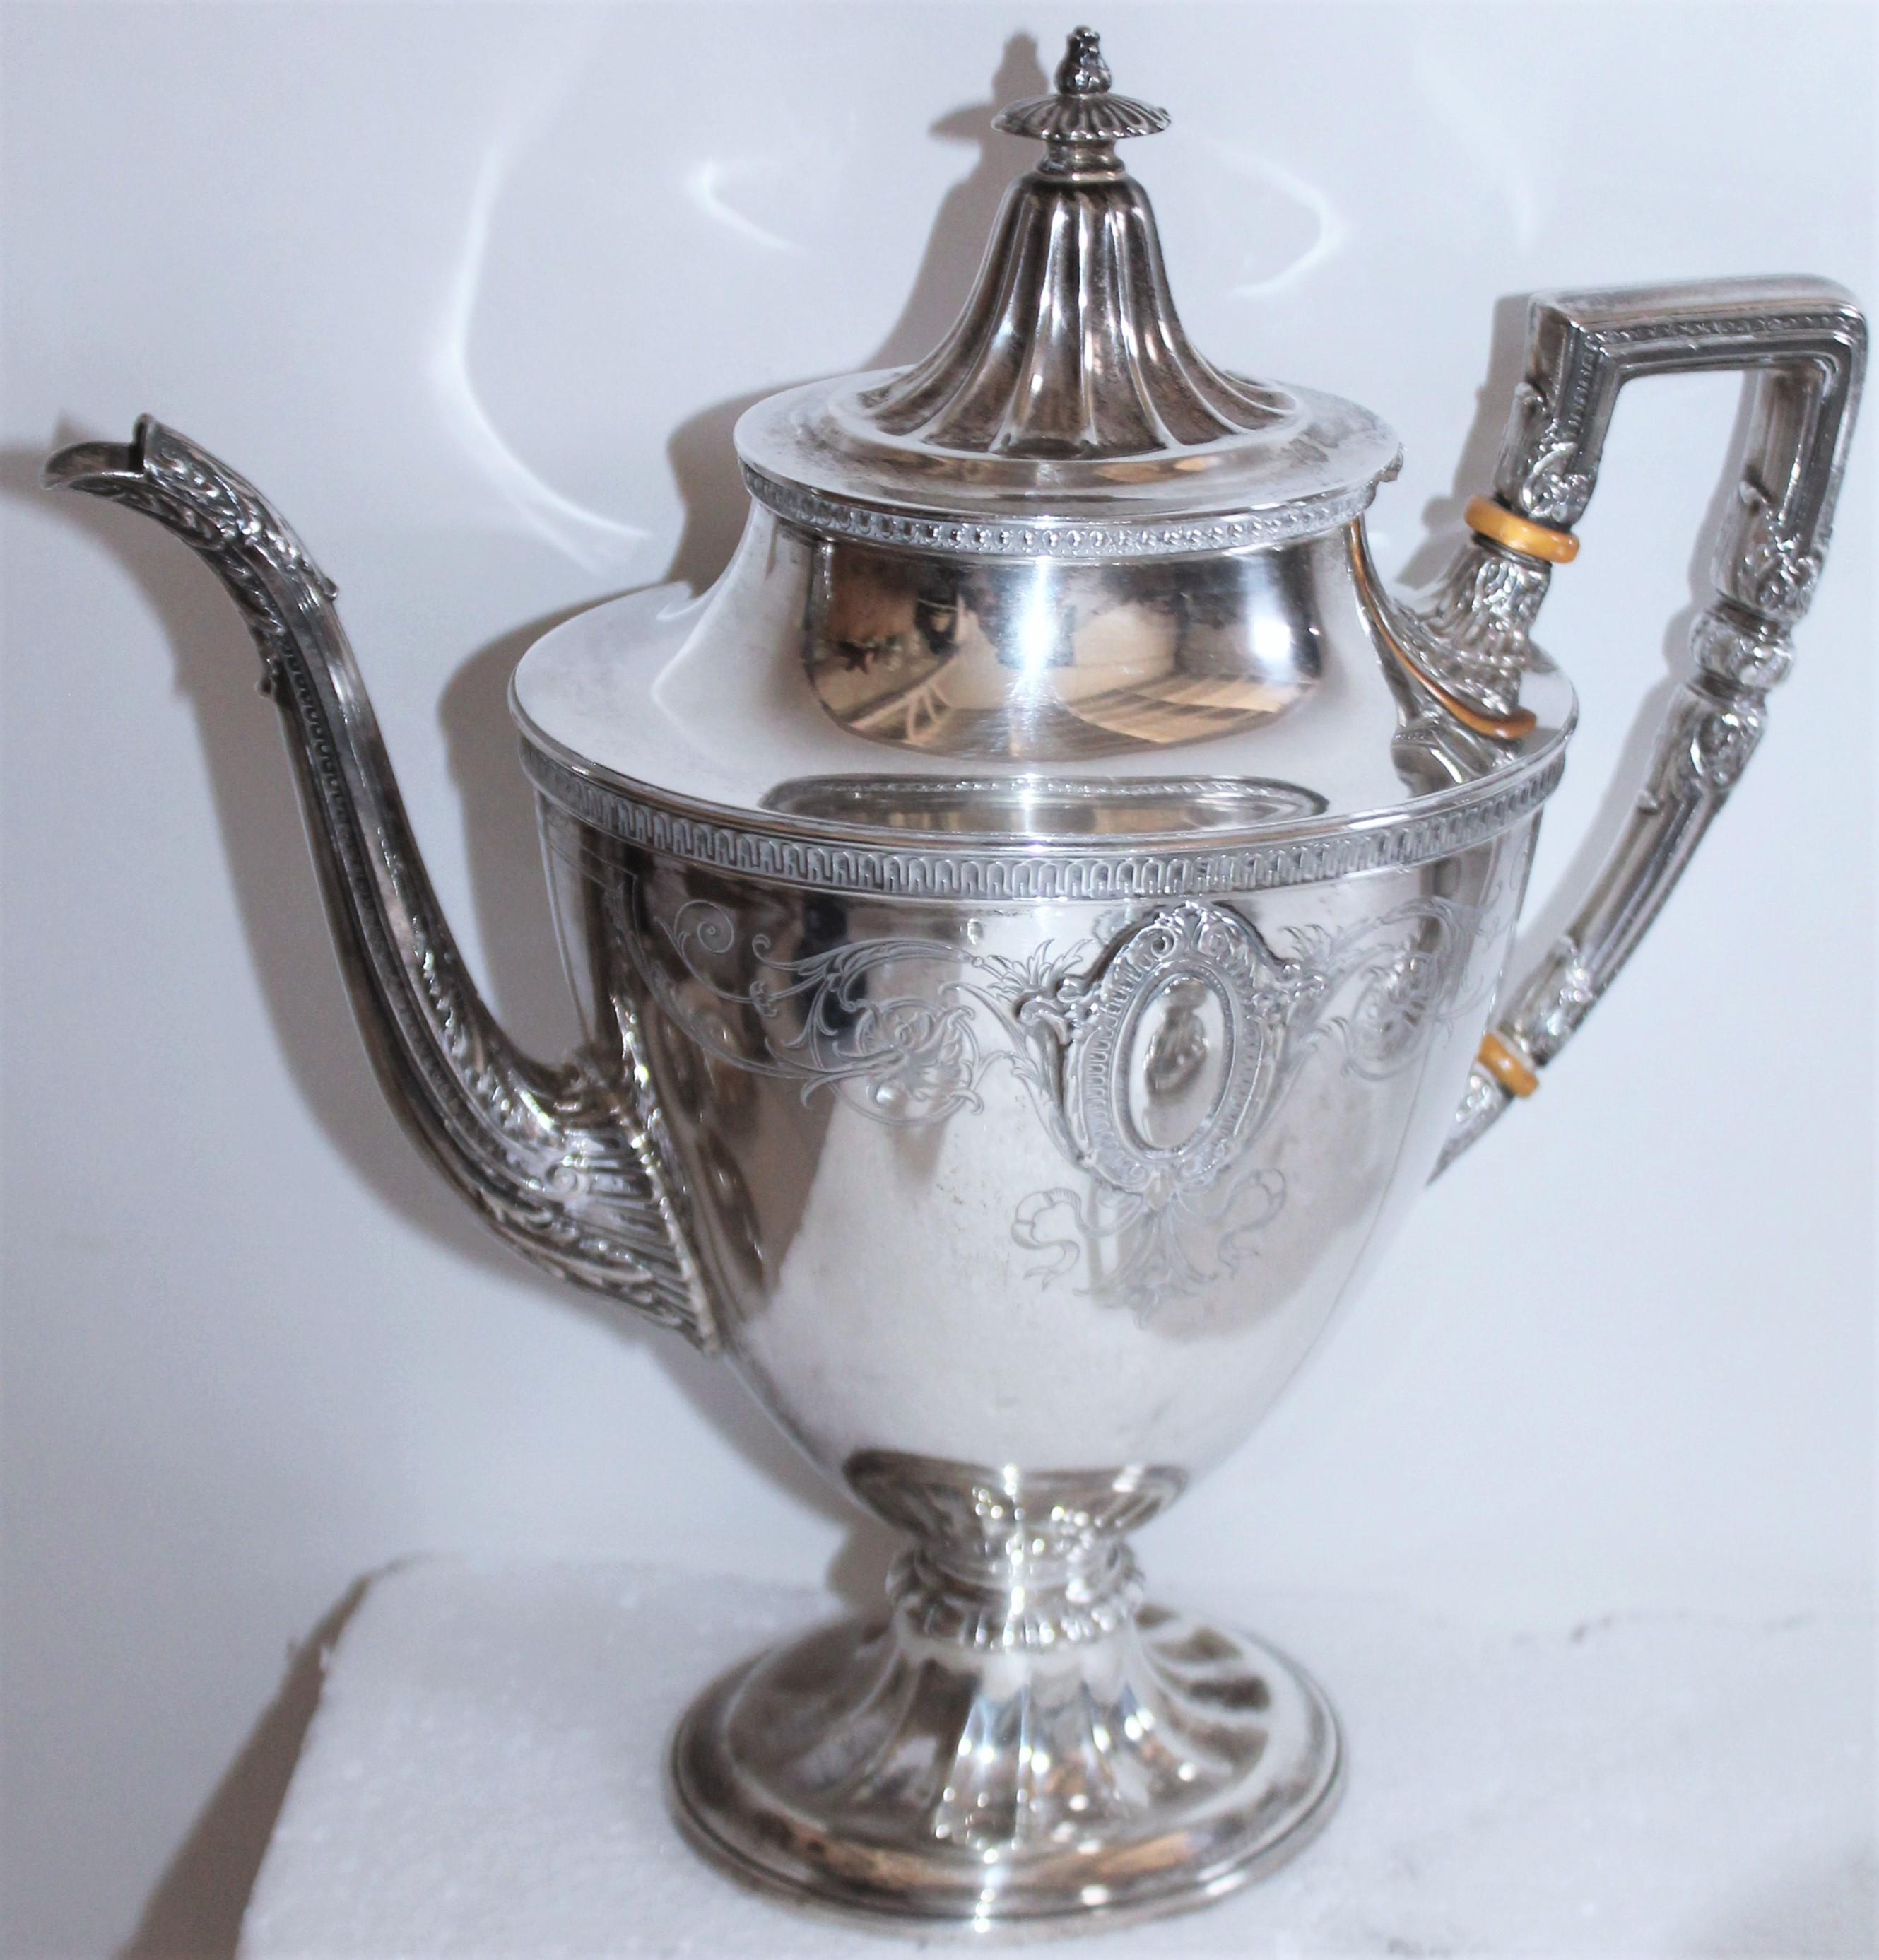 Collection of five Wallace sterling silver tea or coffee. Coffee pot / tea pot, creamer and sugar. Sugar cube bowl on feet.

Measures: Coffee pot - 10 wide x 11 high x 5 deep
Tea pot - 11.5 wide x 8.5 high 5 deep 
Creamer -5.5 wide x 6 high x